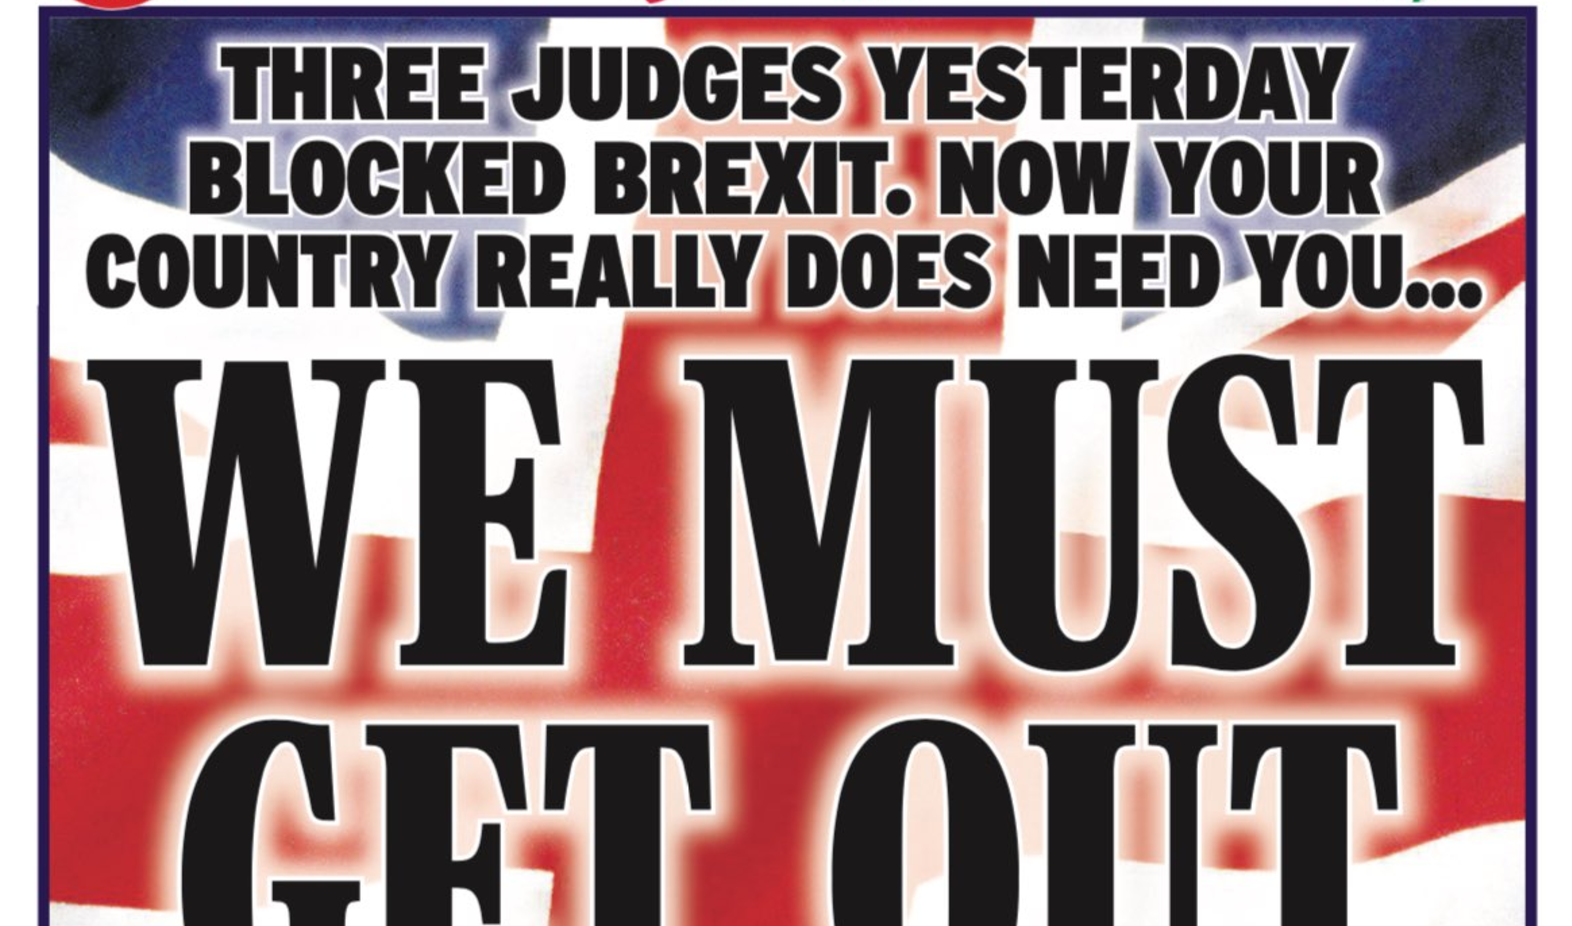 The Daily Express said 'democracy' had died with the decision